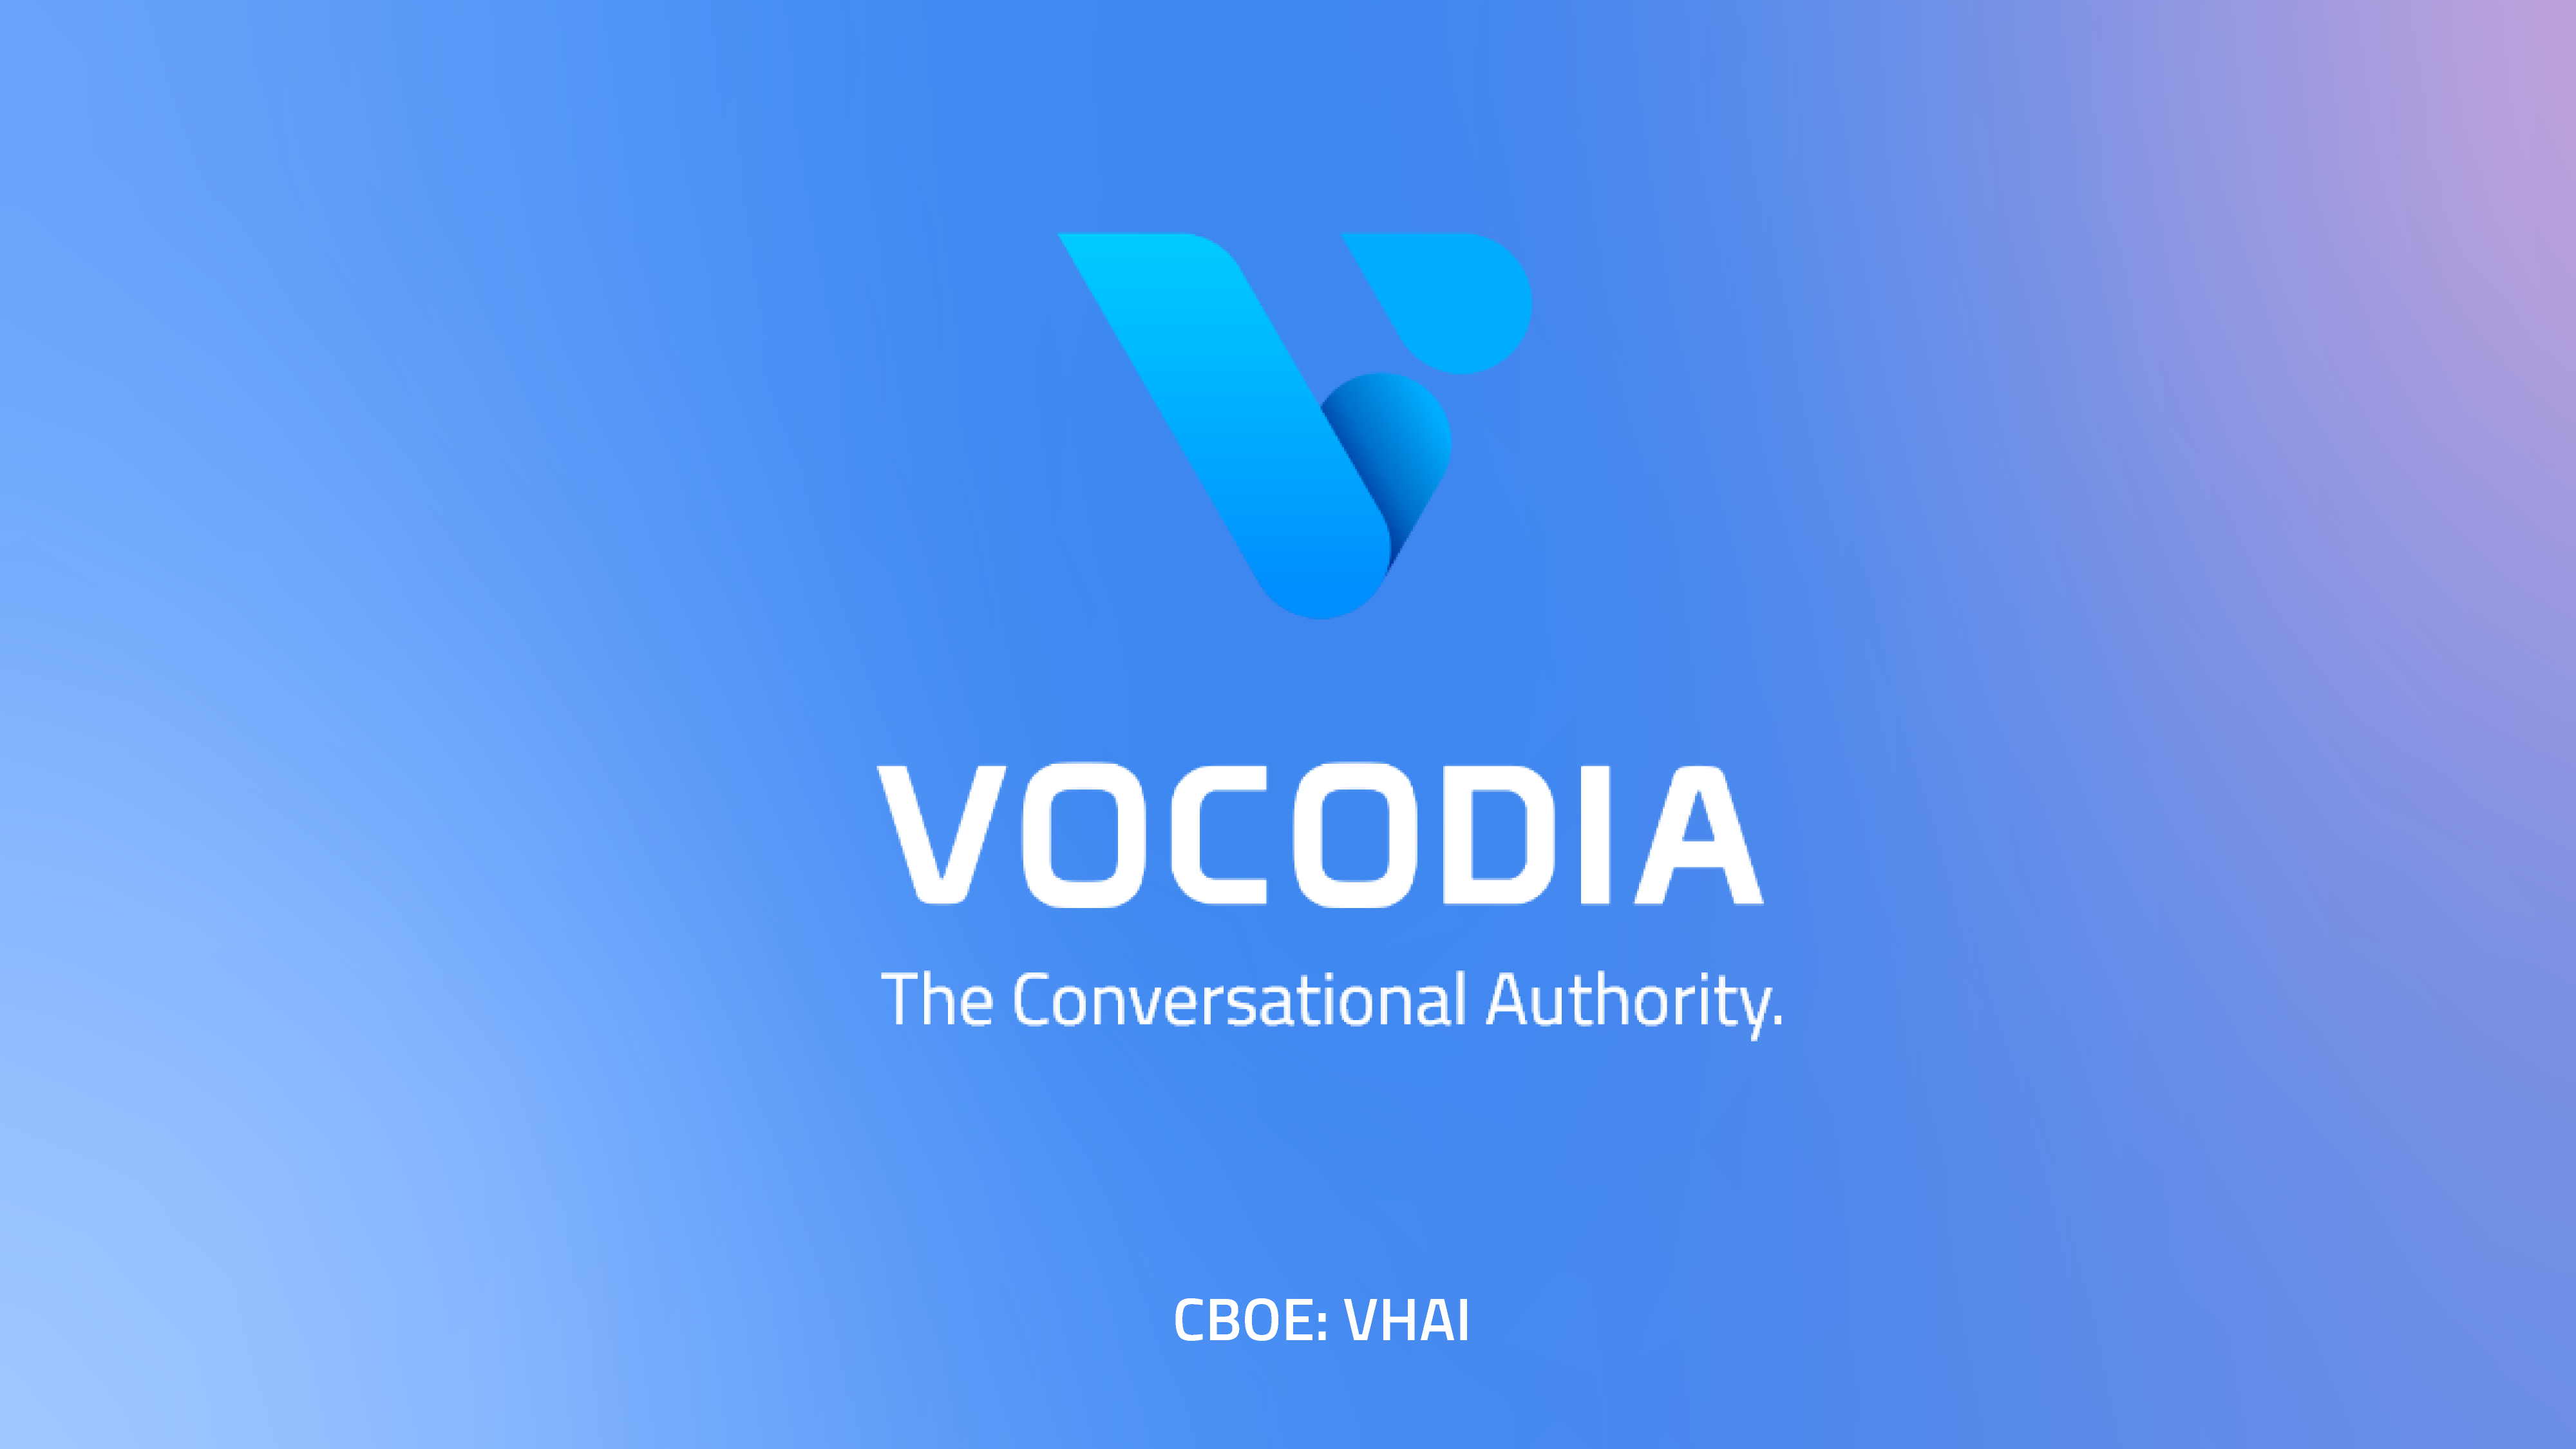 Vocodia's Conversational AI Technology In Play After Magnificent Seven Invests Into Specialized Deliverable ($VHAI)